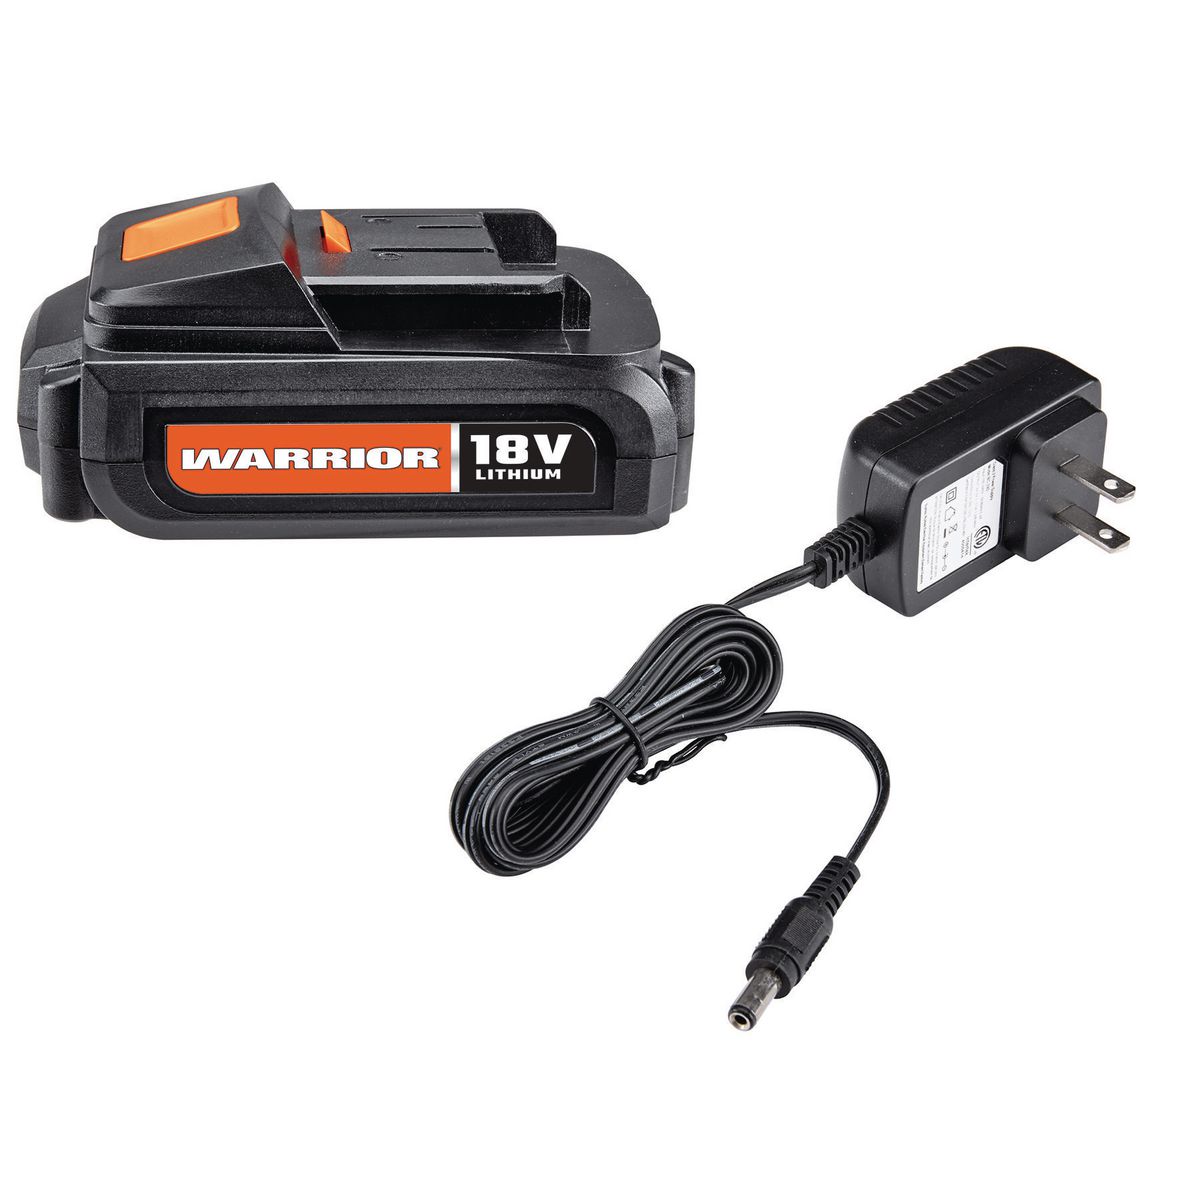 WARRIOR 18V Lithium Battery with Charger - Item 64256